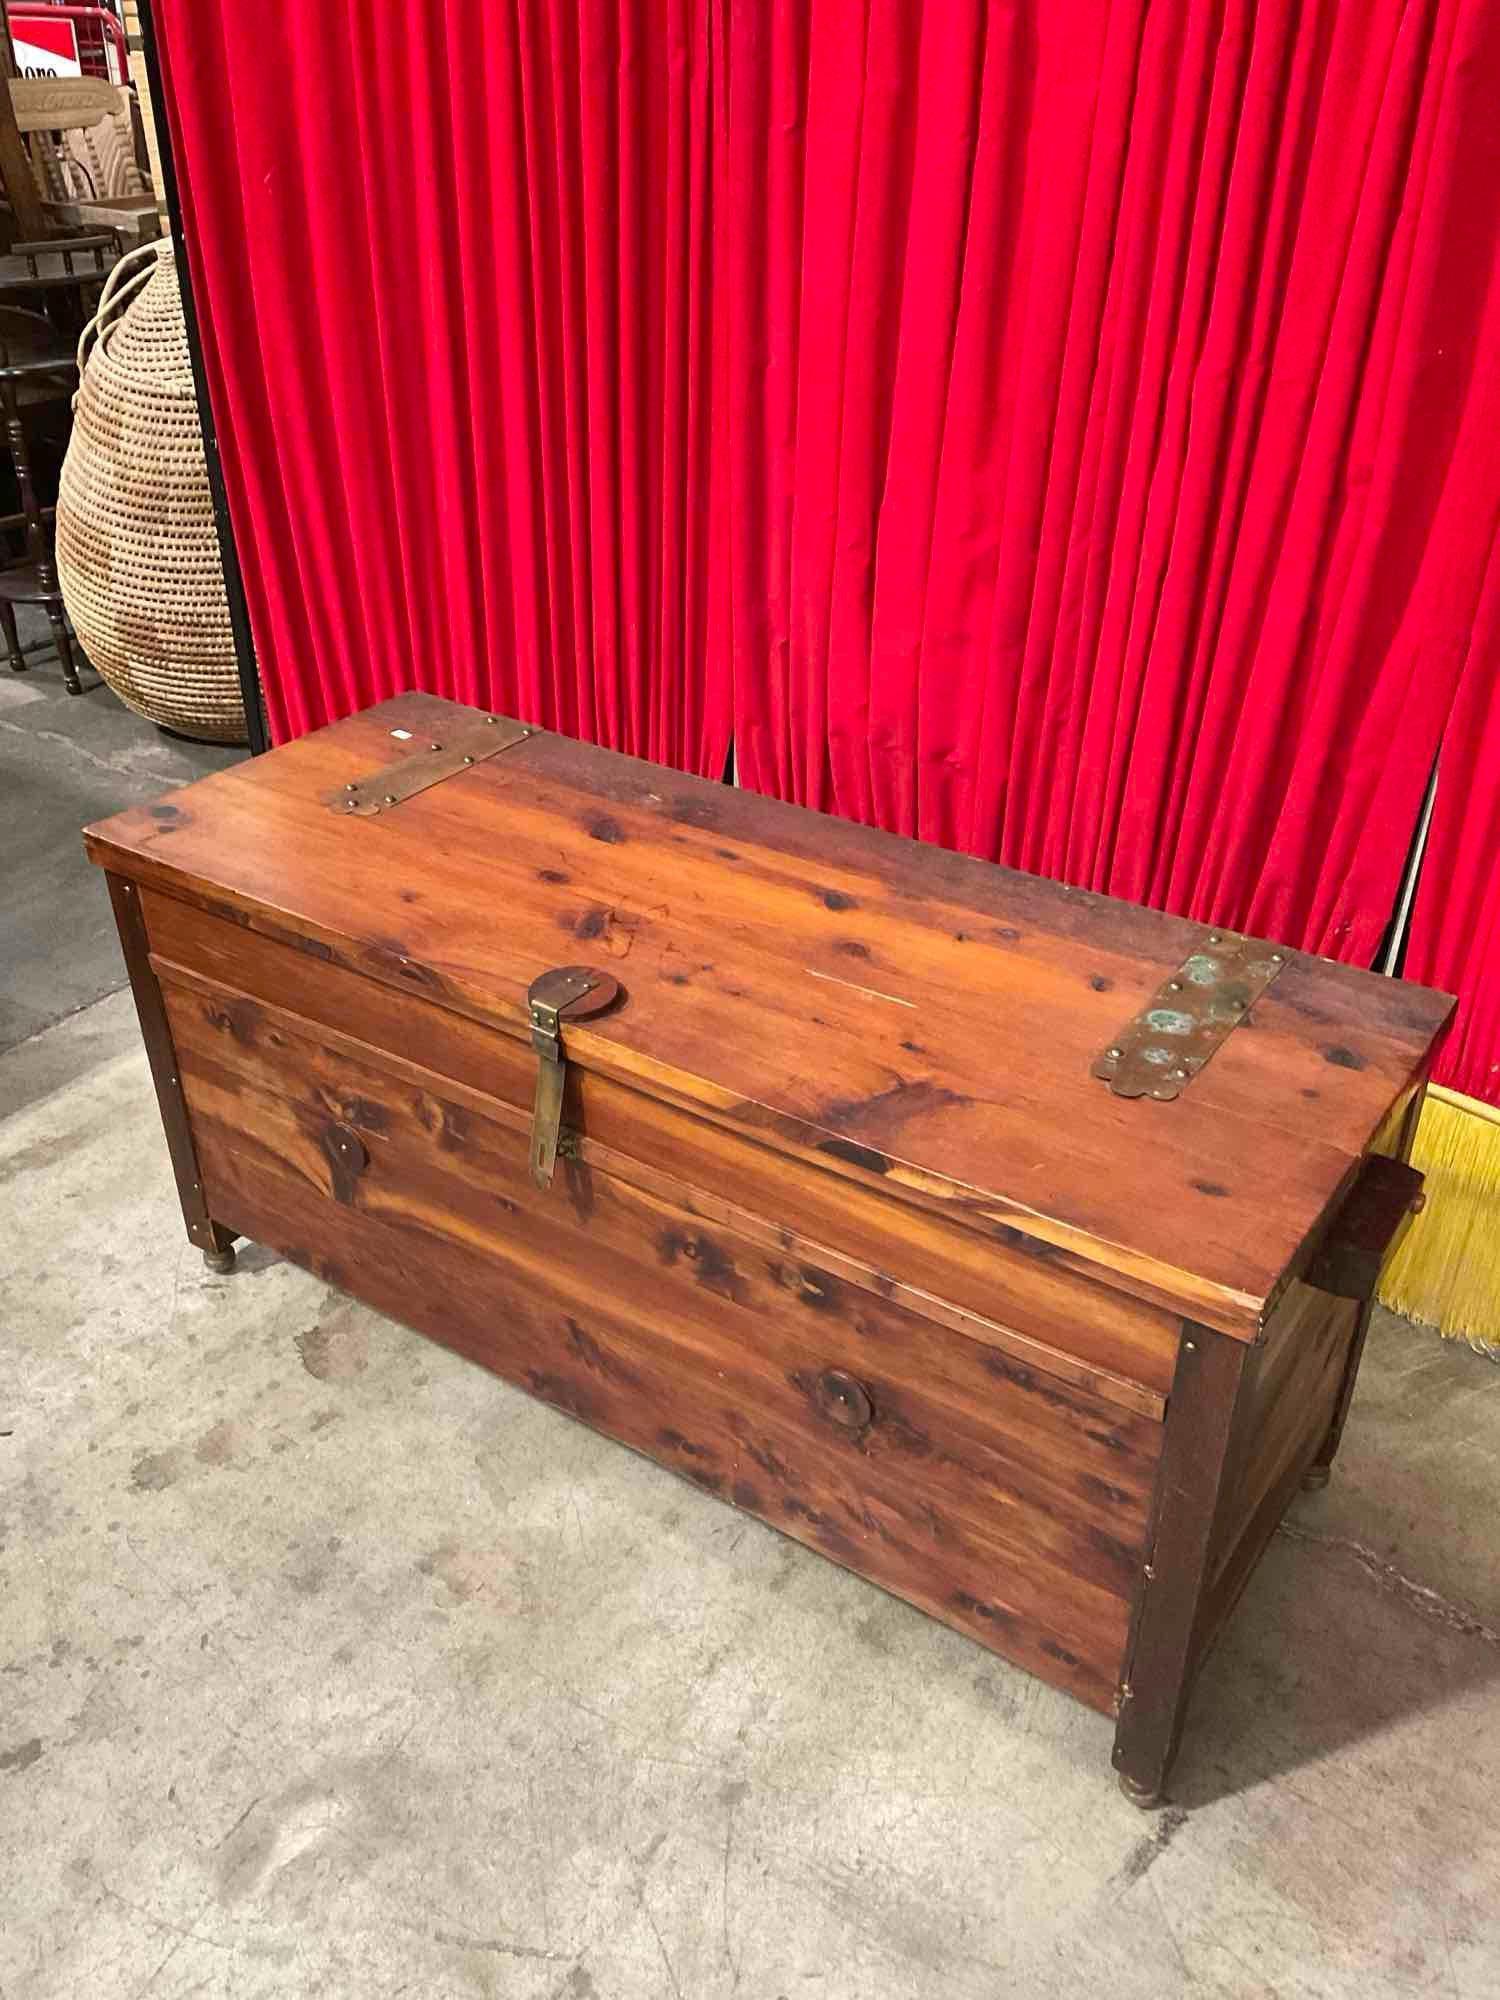 Vintage Wooden Wheeled Chest w/ Brass Details. Measures 45" x 21" Cedar Lined? See pics.